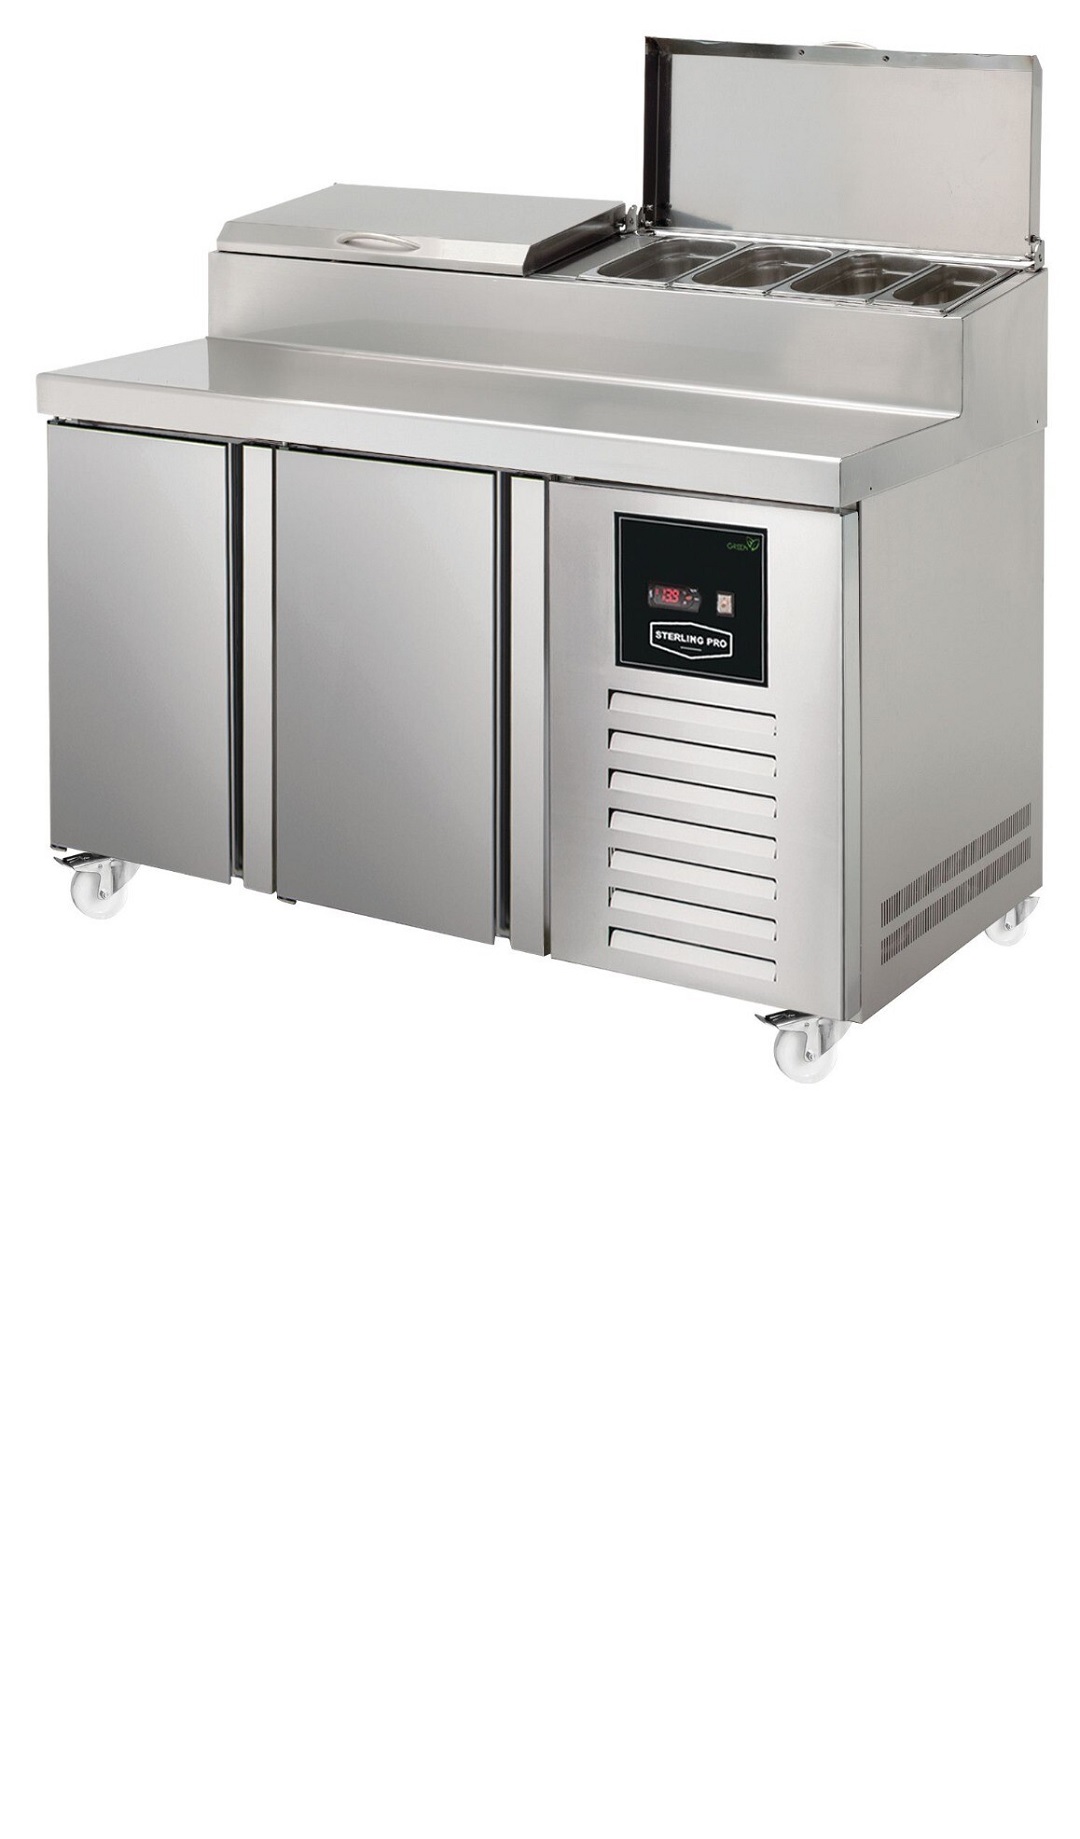 Sterling Pro SPIZ-135 Two Door Refrigerated Pizza Preparation Counter